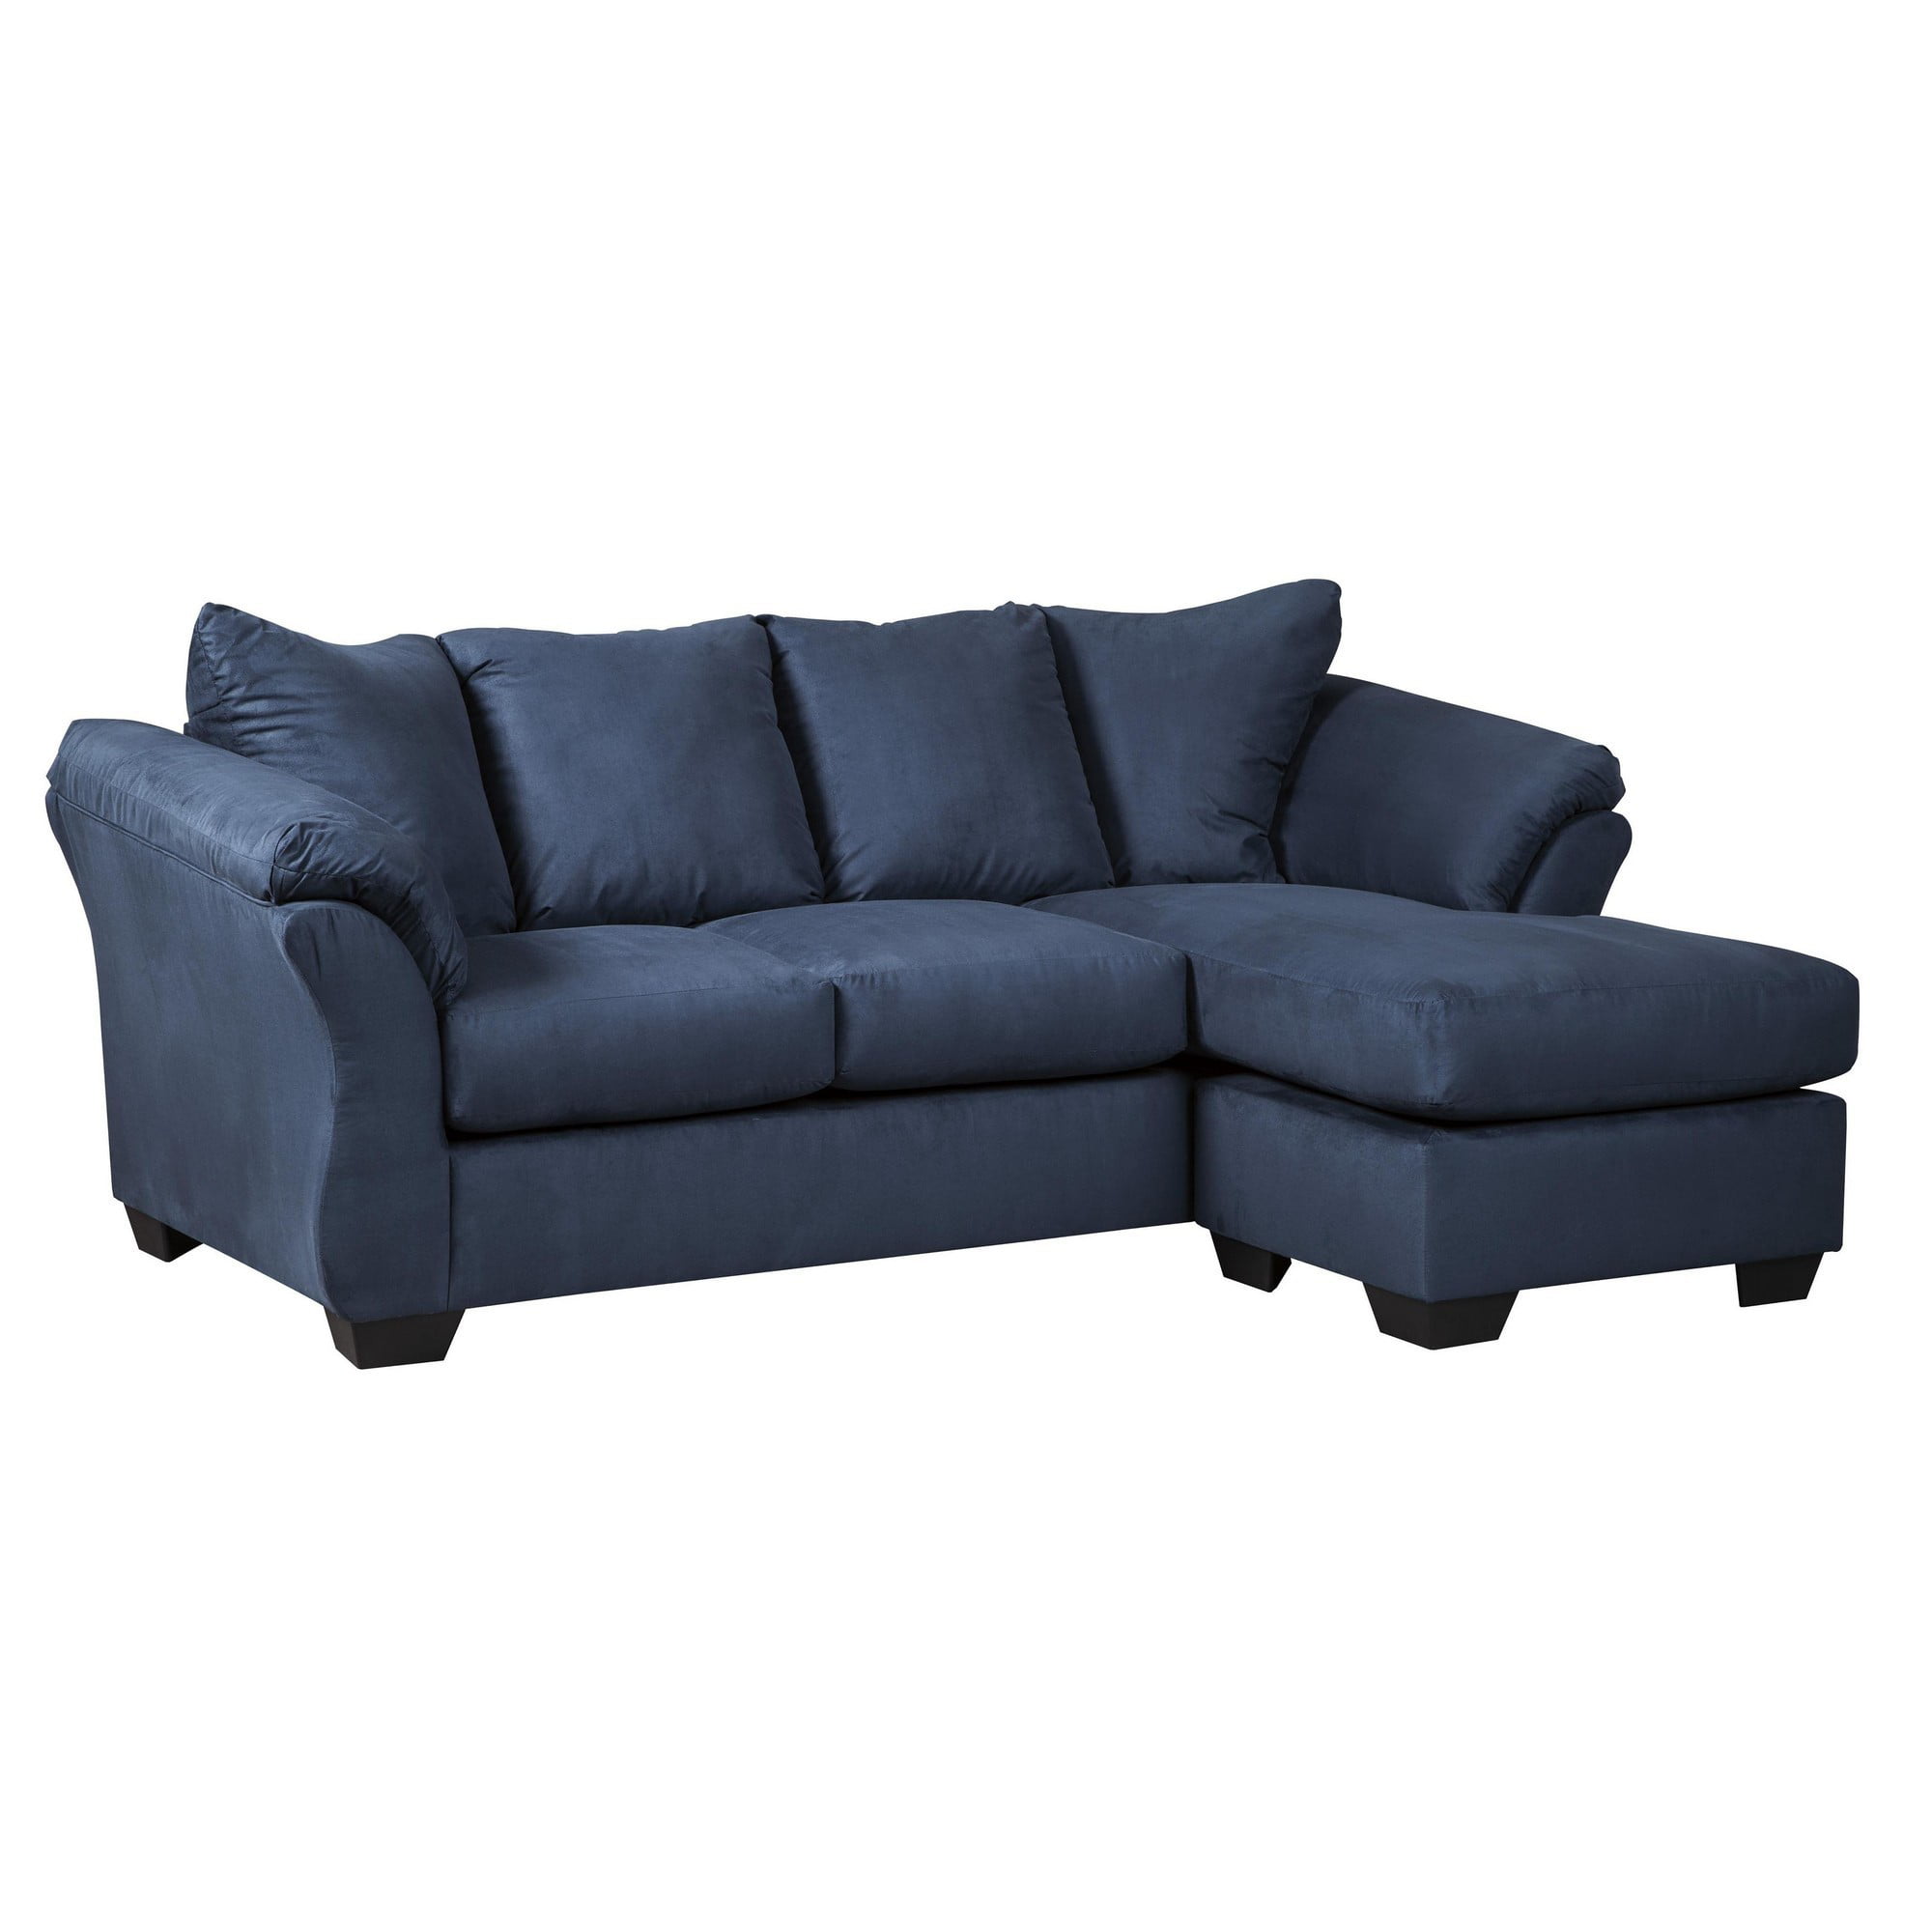 Benzara Fabric Upholstered Sofa Chaise with Pillow Arms